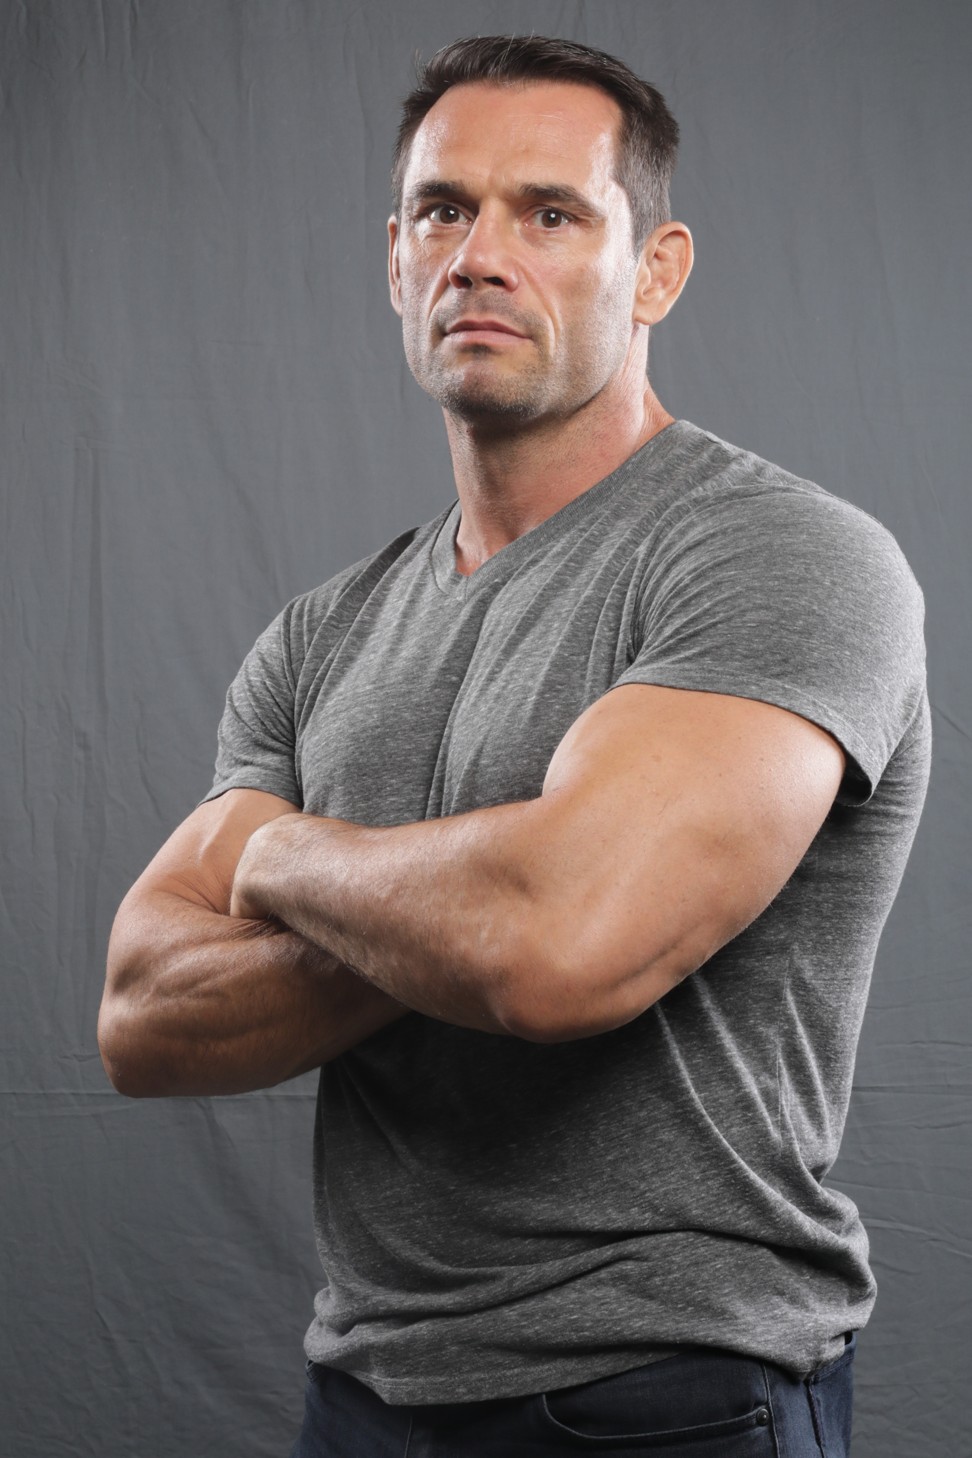 MMA star Rich Franklin is an instrumental figure in the promotion's One Warrior Series (OWS). Photo: Handout